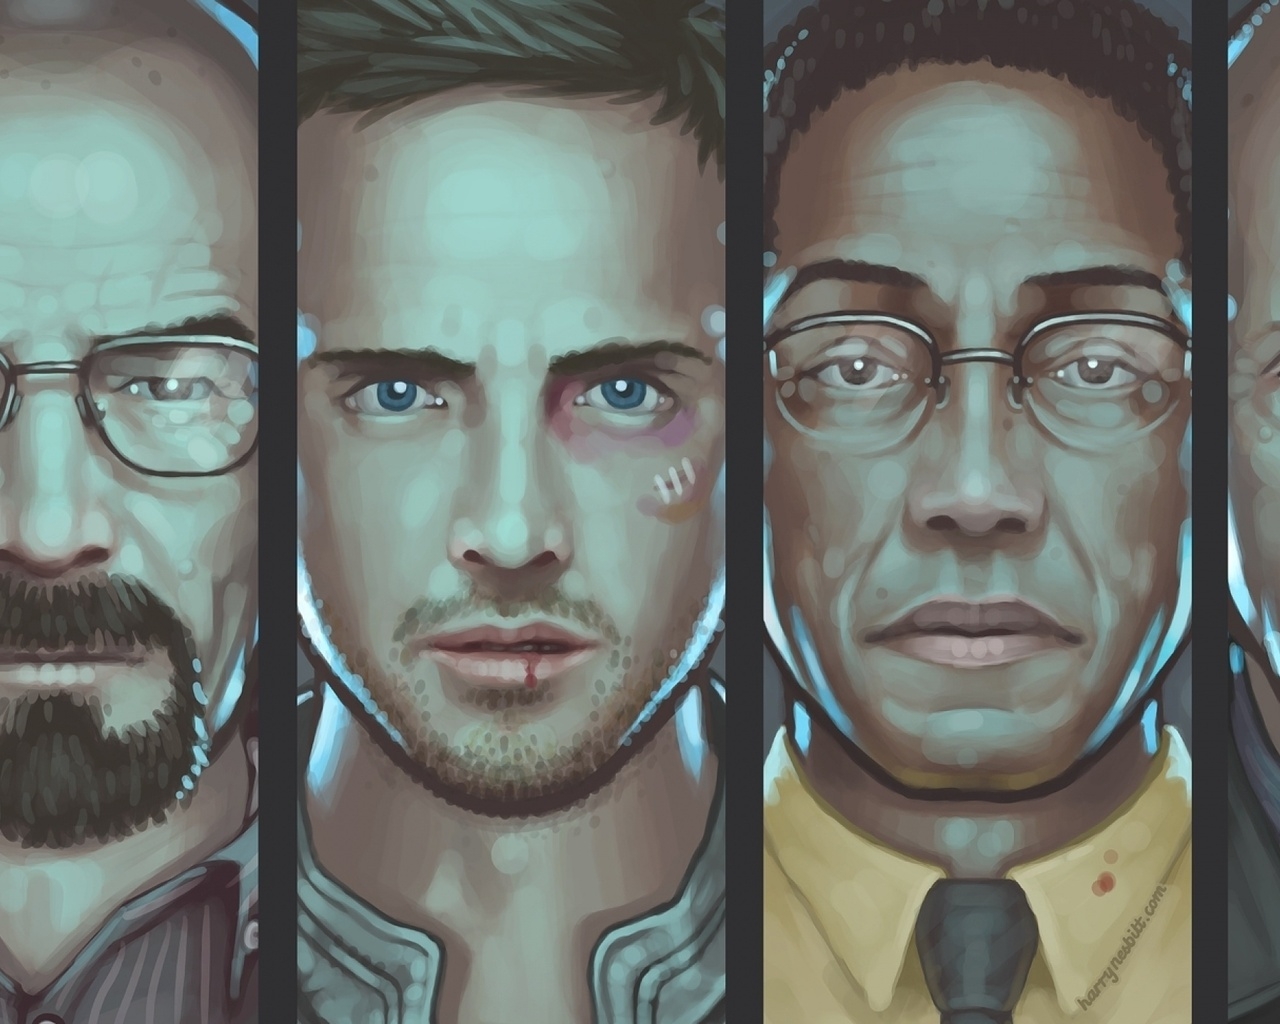 Breaking Bad Characters Artwork for 1280 x 1024 resolution